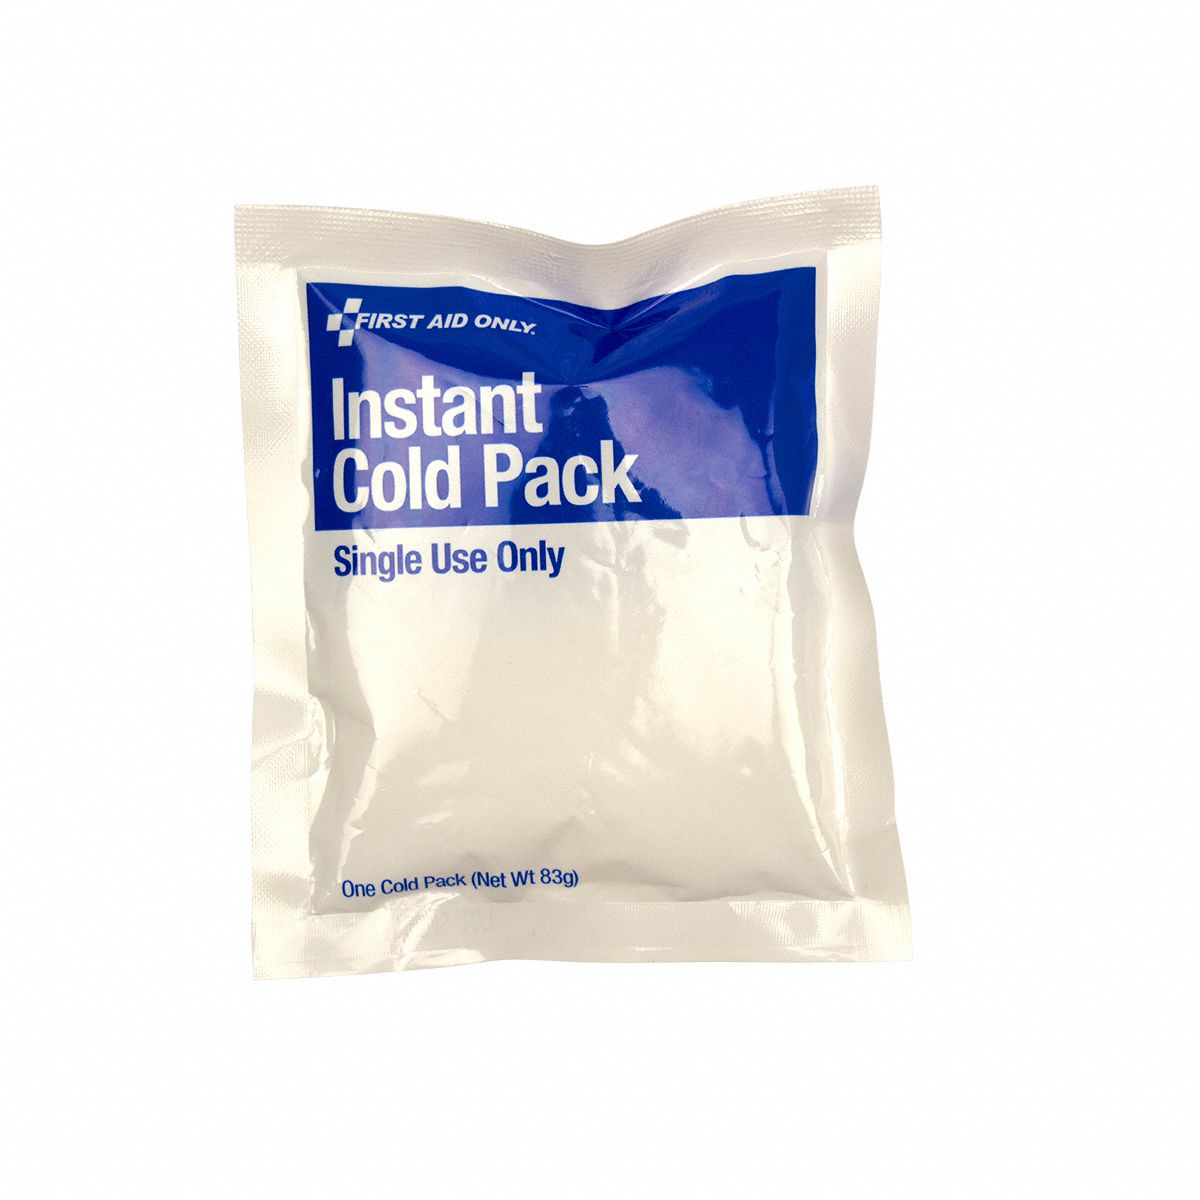 Soplar Censo nacional Cercanamente FIRST AID ONLY, Disposable, White, Instant Cold Pack - 39P019|K2104 -  Grainger